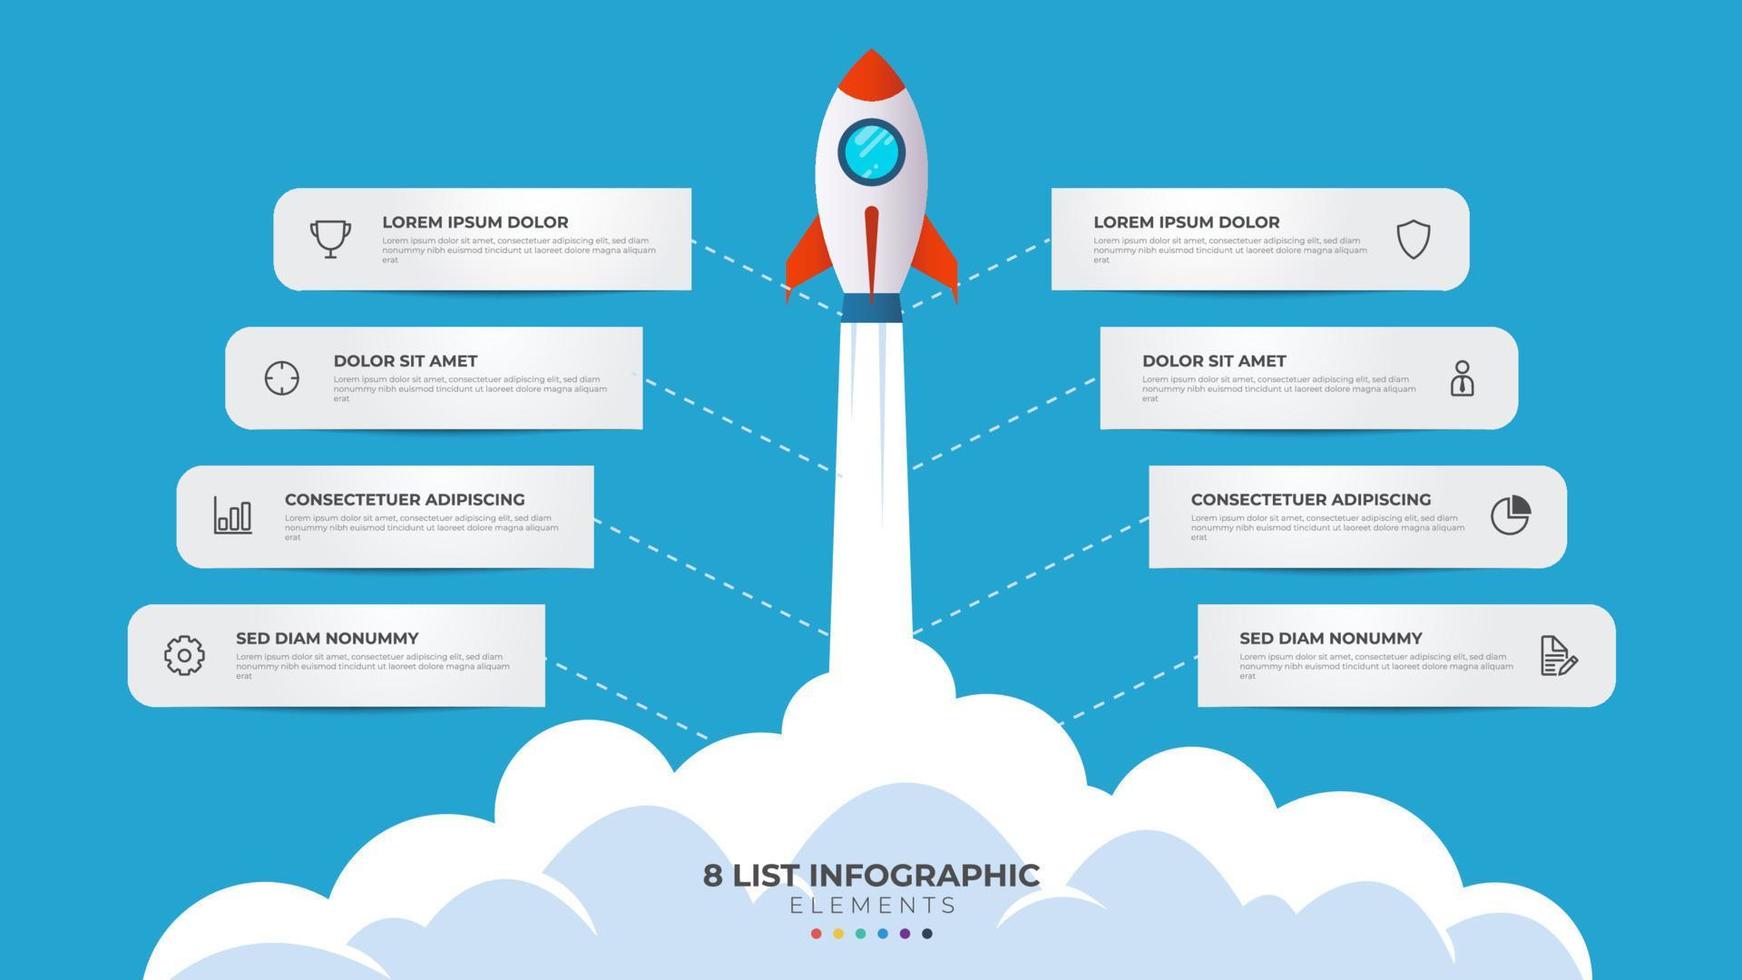 8 list of steps, layout diagram with stair level sequence, infographic element template with rocket startup launch illustration vector